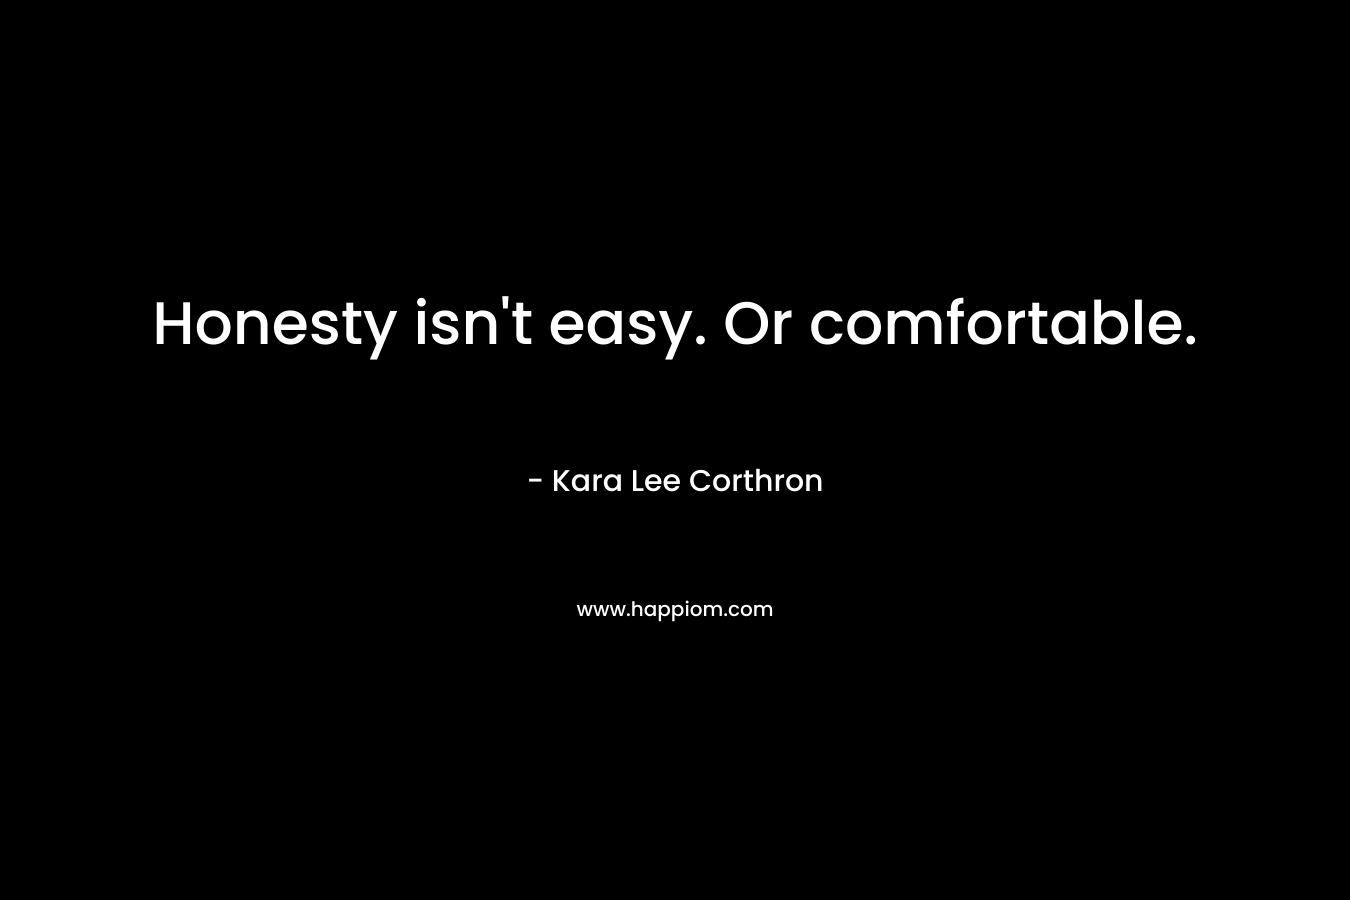 Honesty isn't easy. Or comfortable.